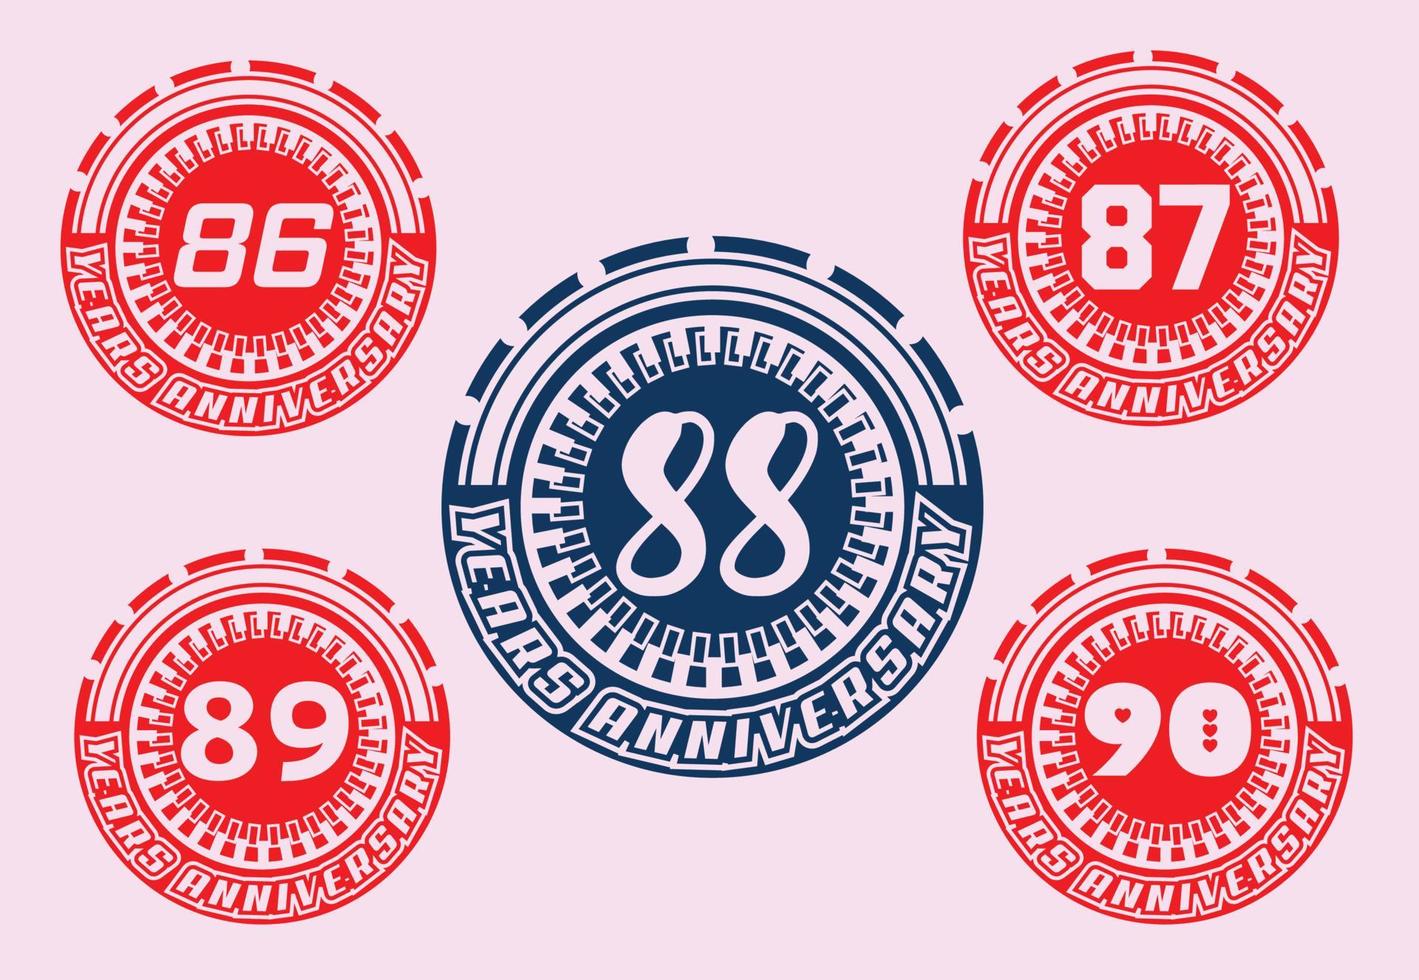 86 to 90 years anniversary logo and sticker design vector